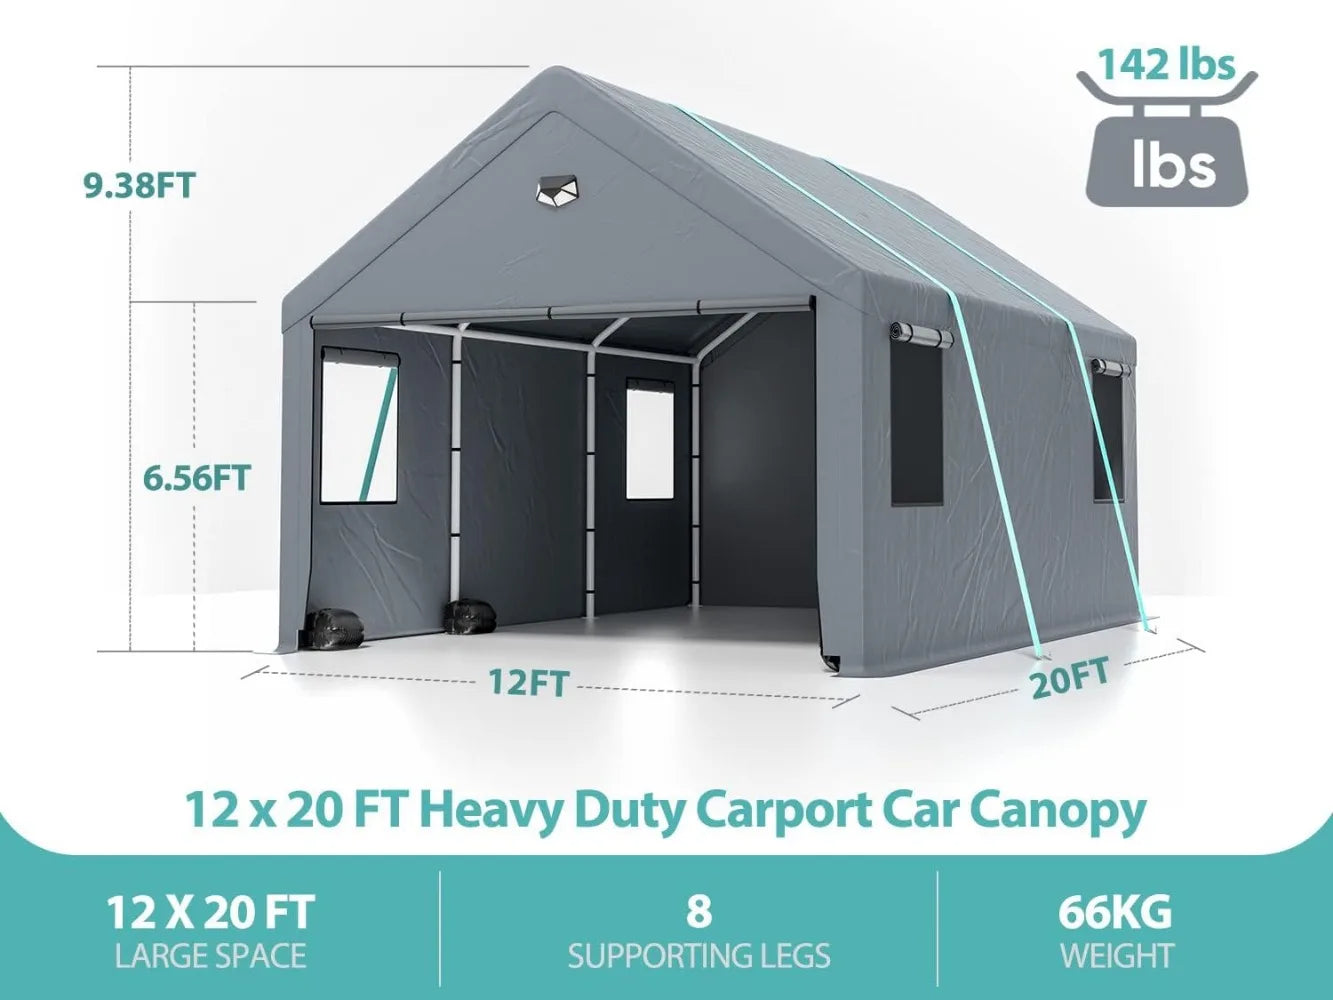 12 * 20 Heavy Duty Carport Canopy - Extra Large Portable Car Tent Garage with Roll-Up Windows and All-Season Tarp Cover